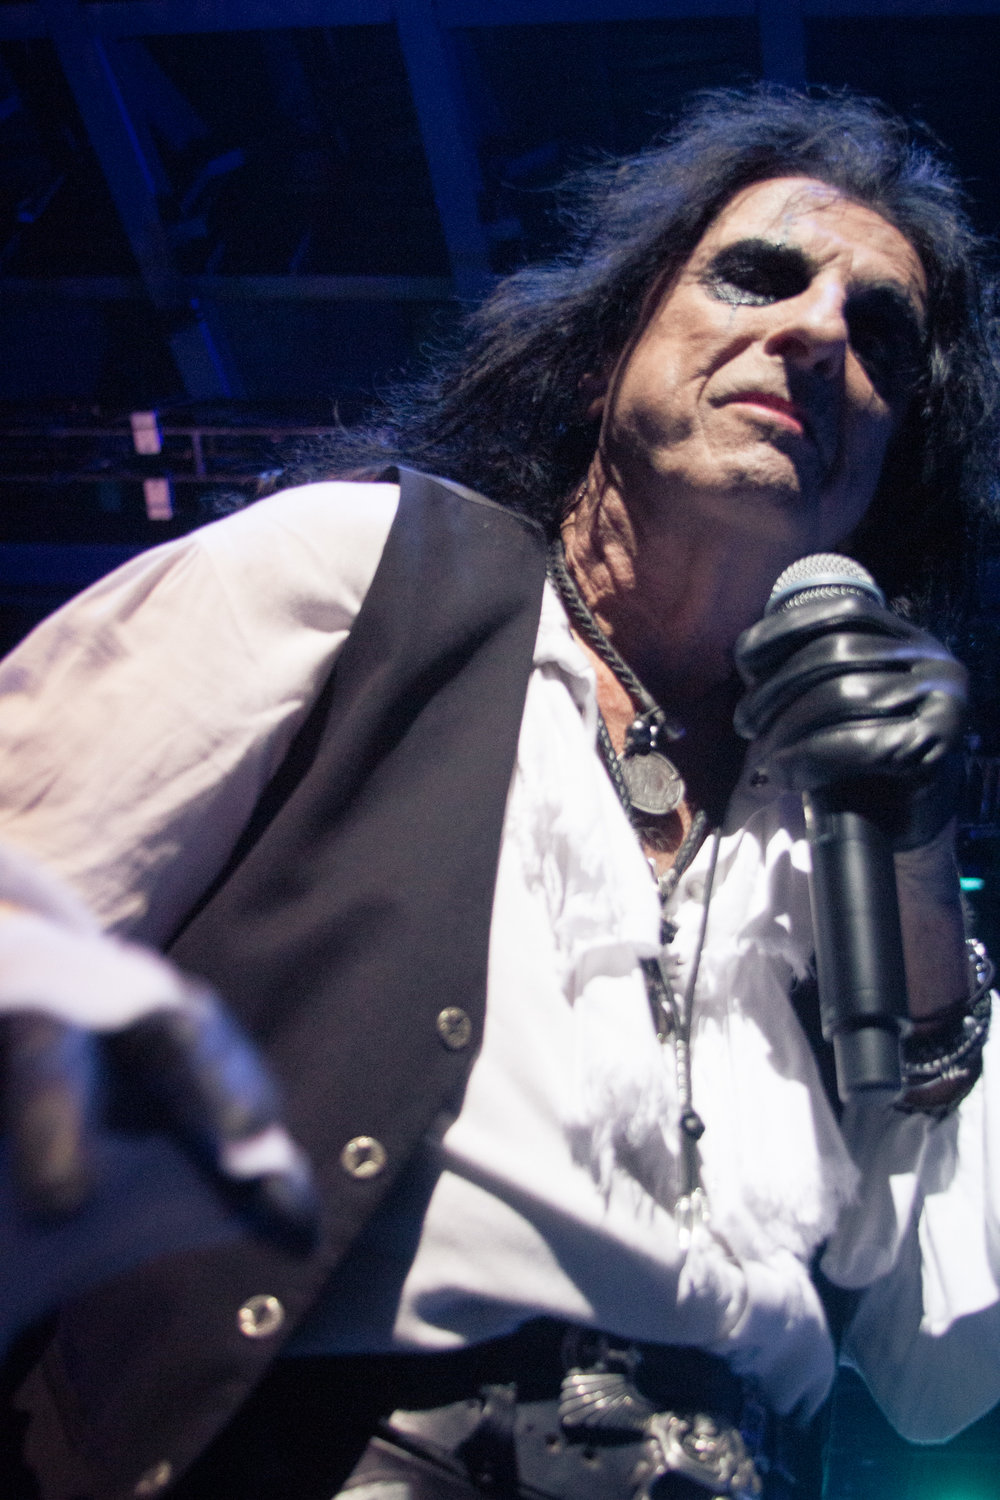 This photo of Alice Cooper only makes sense with the one that follows it.